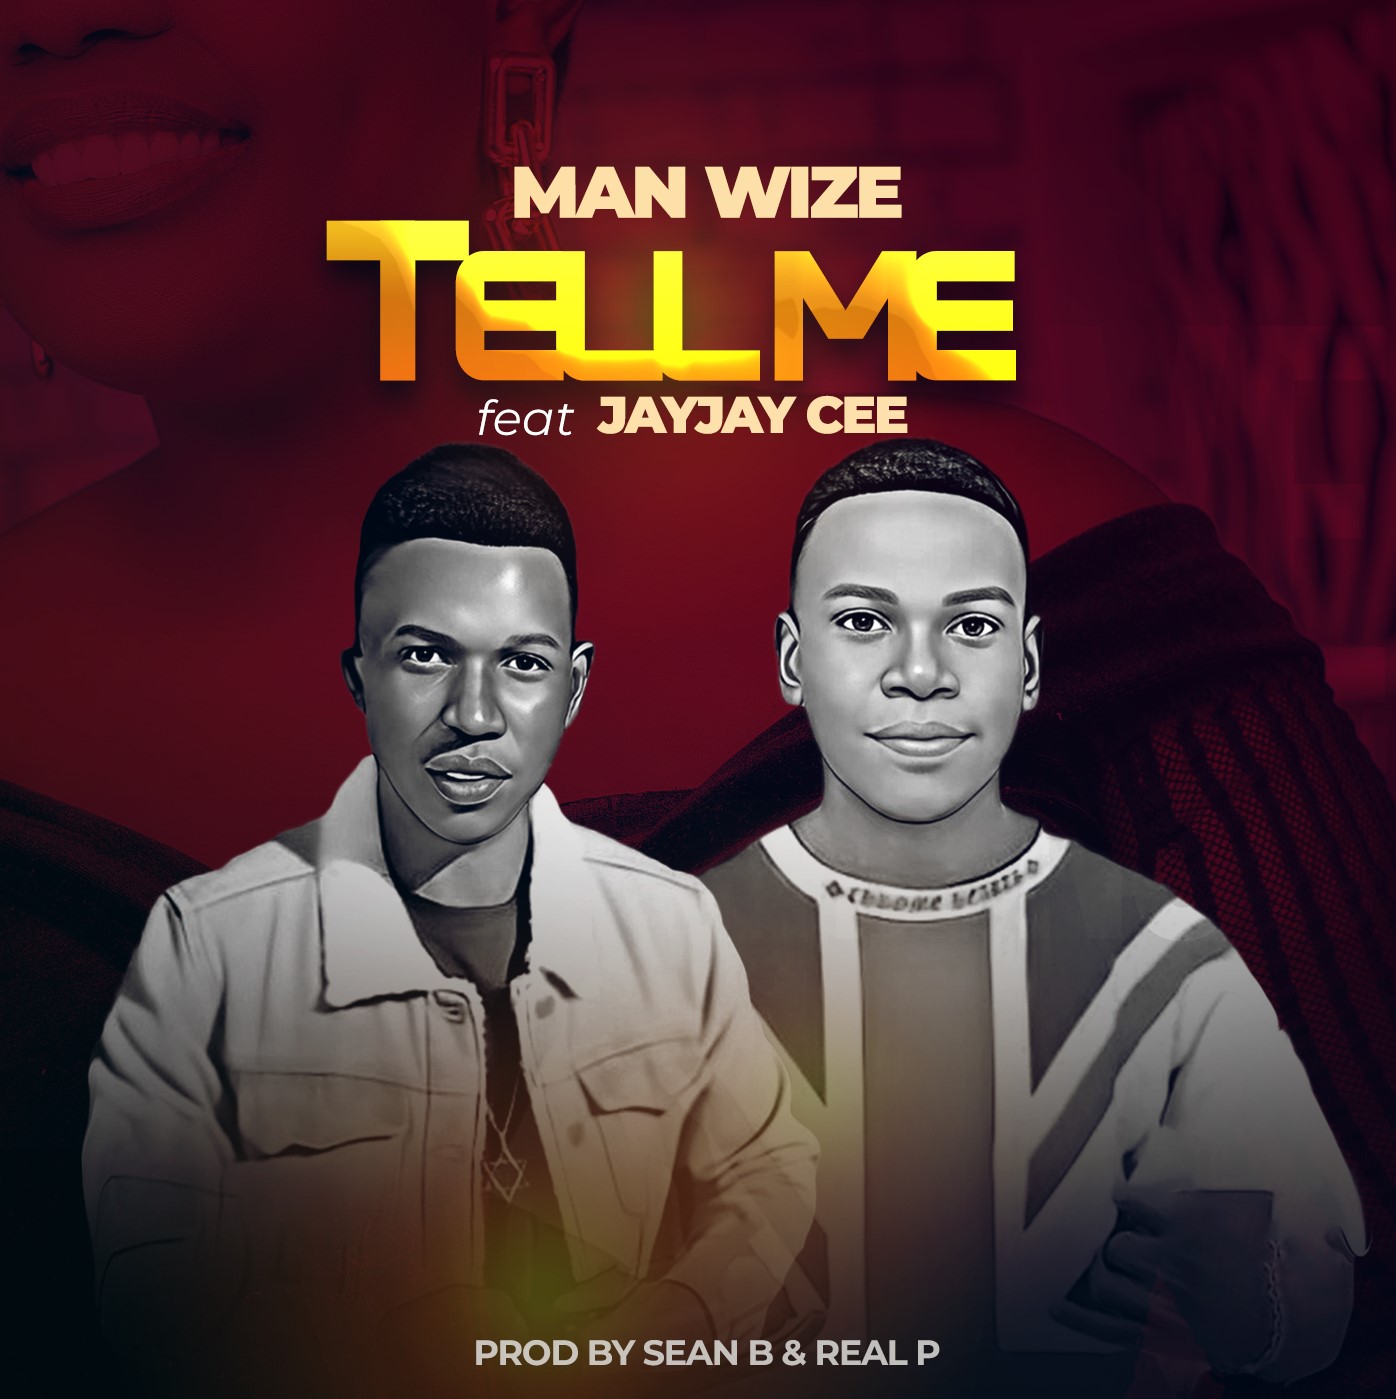 Man-wize-ft-Jay-Jay-Cee-Tell-me